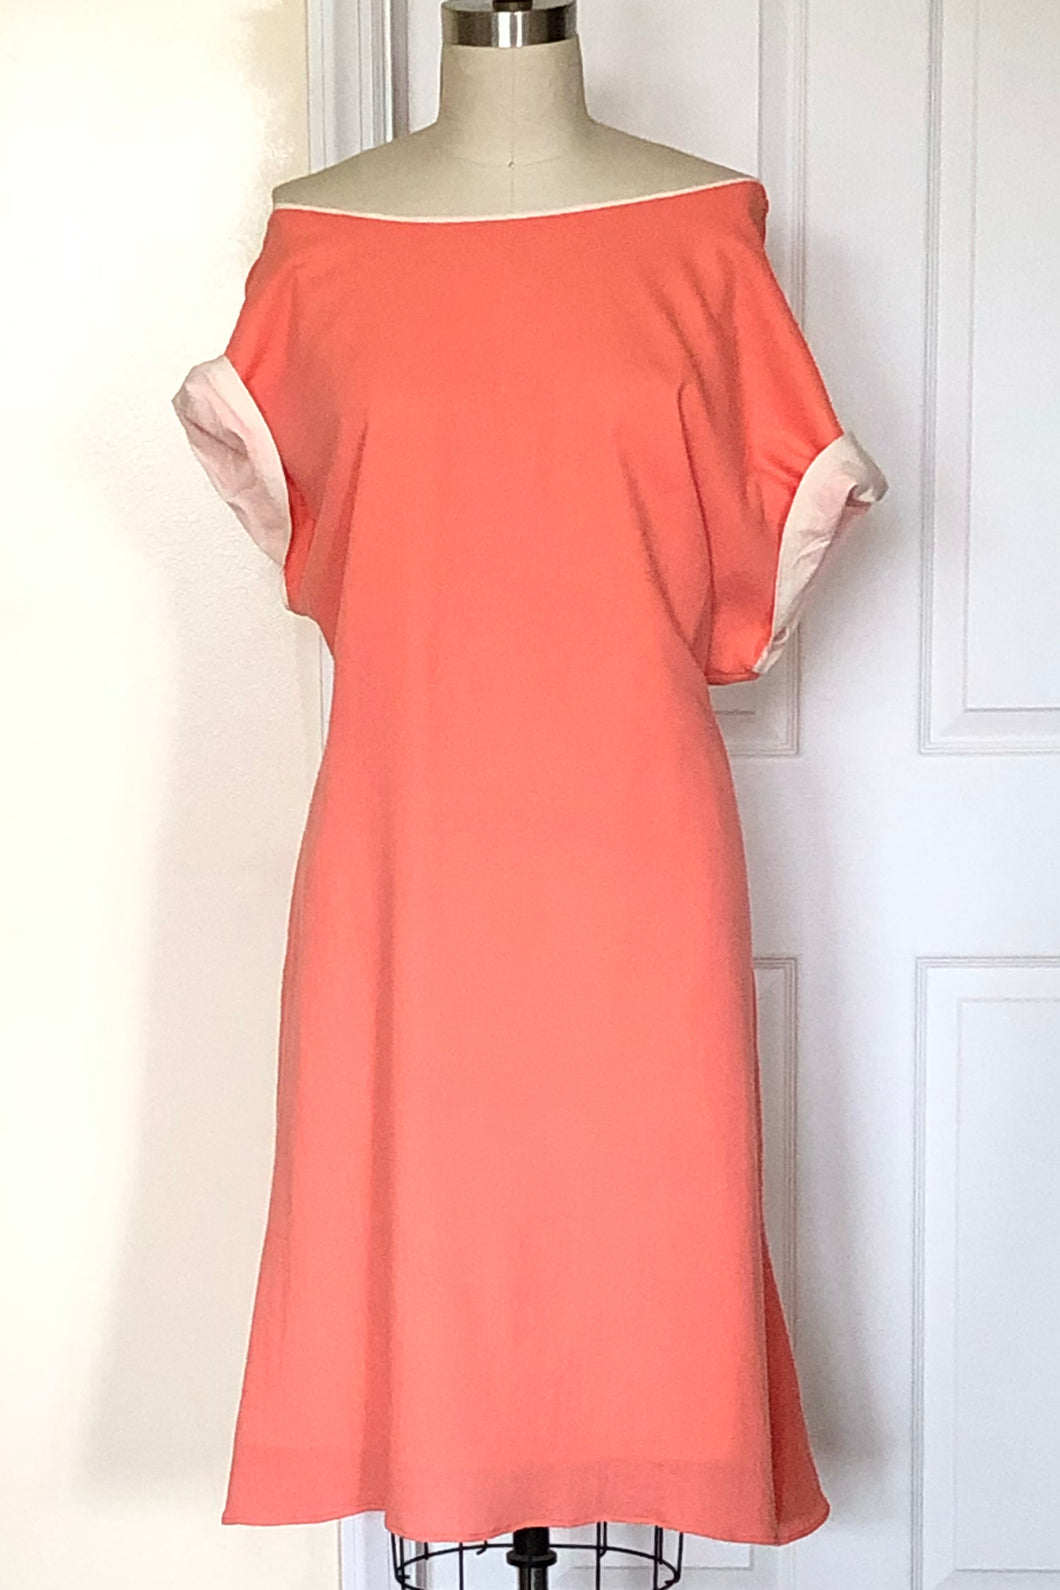 Asymmetric Off the Shoulder Dress (Coral/Off White) Style #110MJ